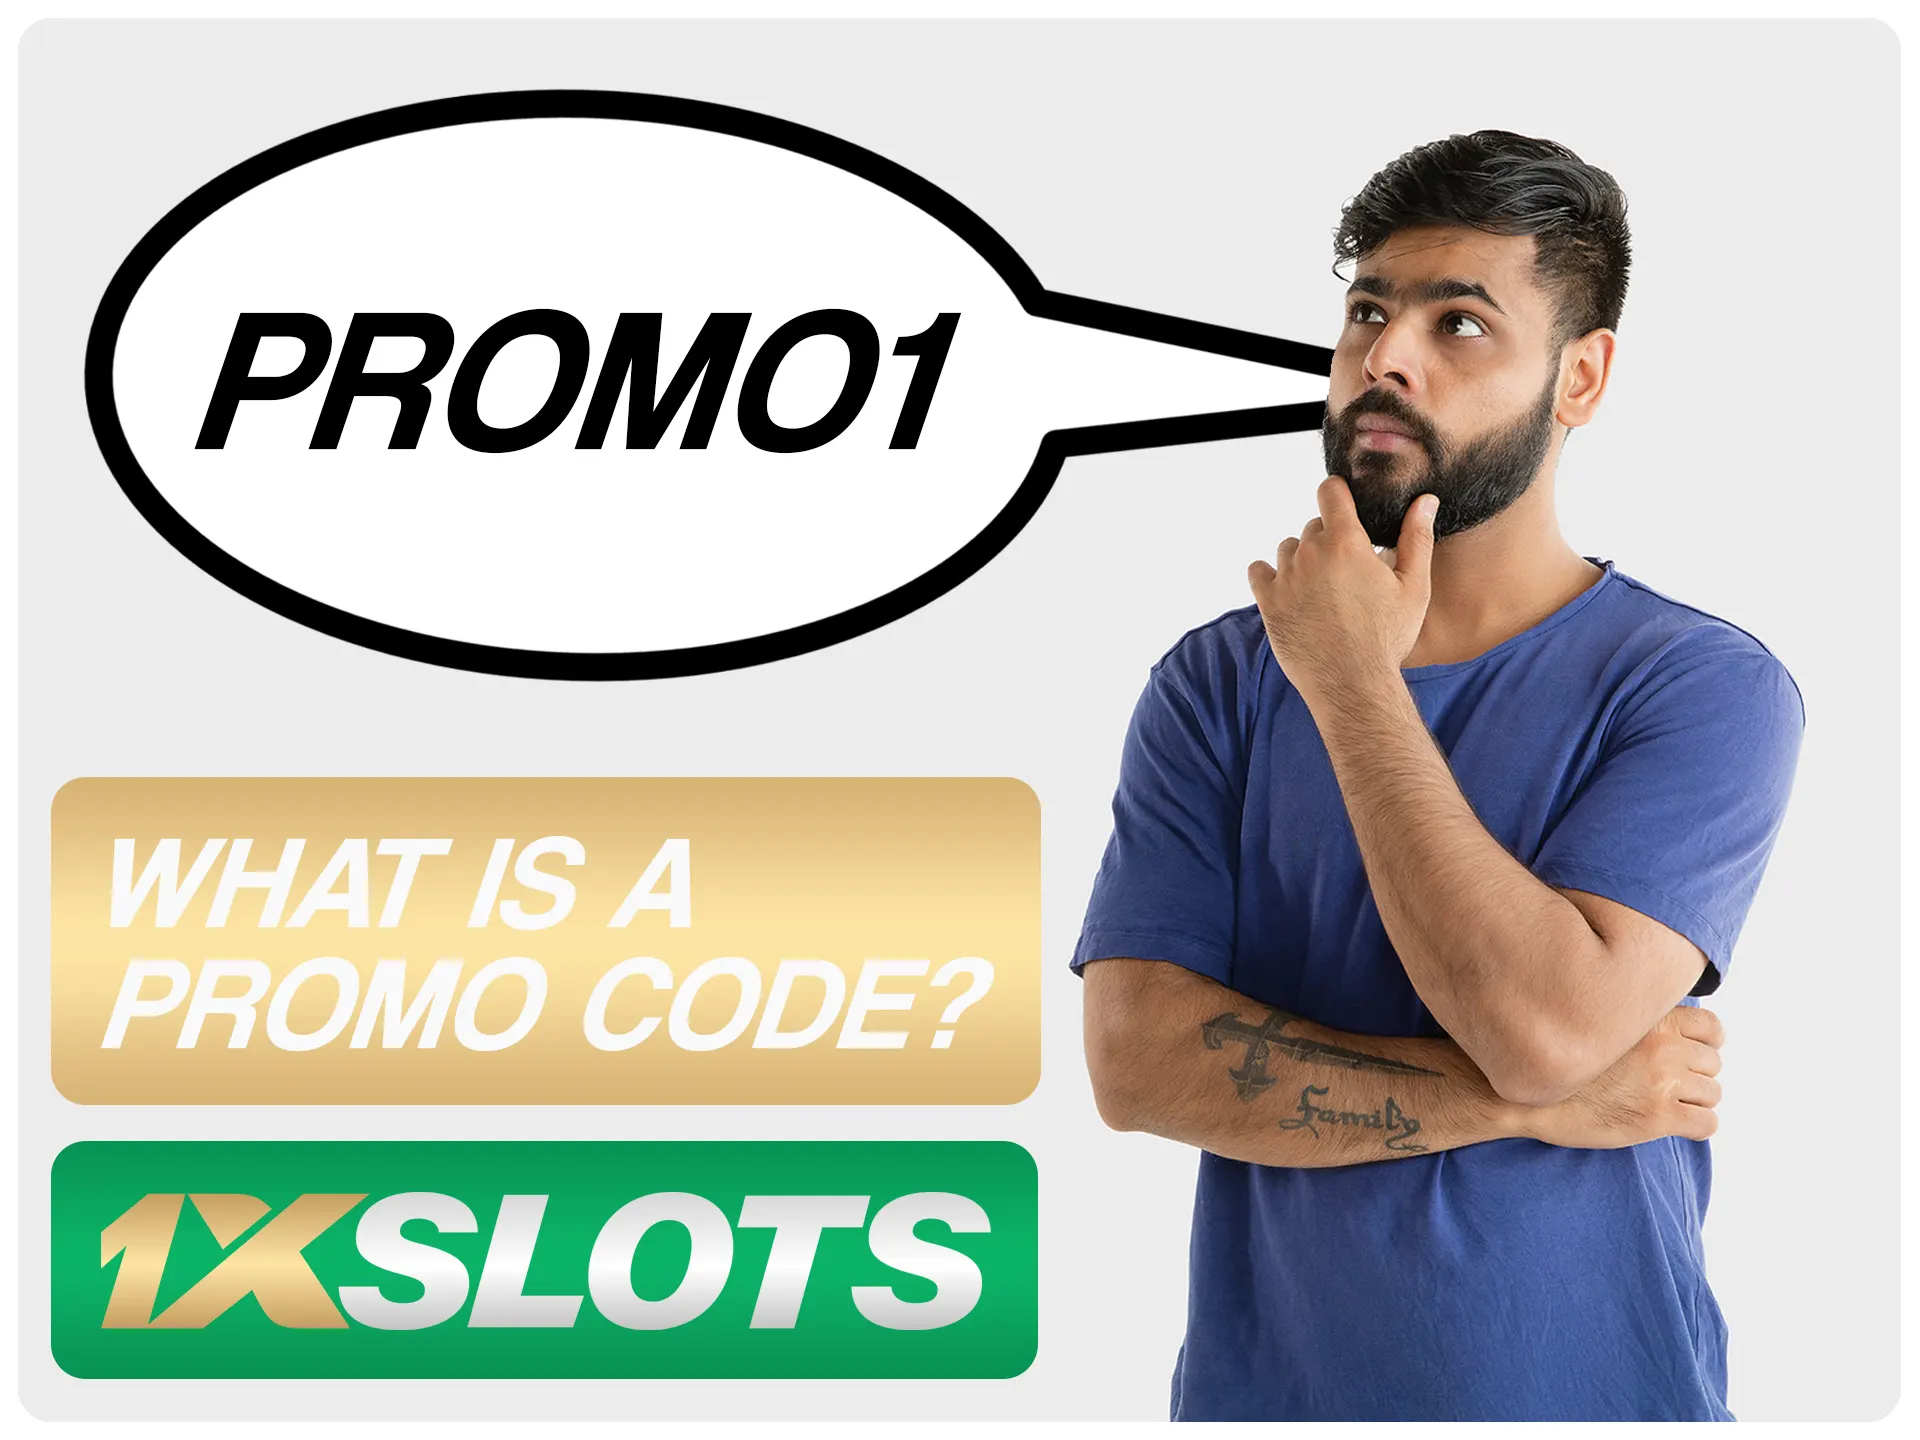 Learn what advantages 1xSlots promocodes opens to you.